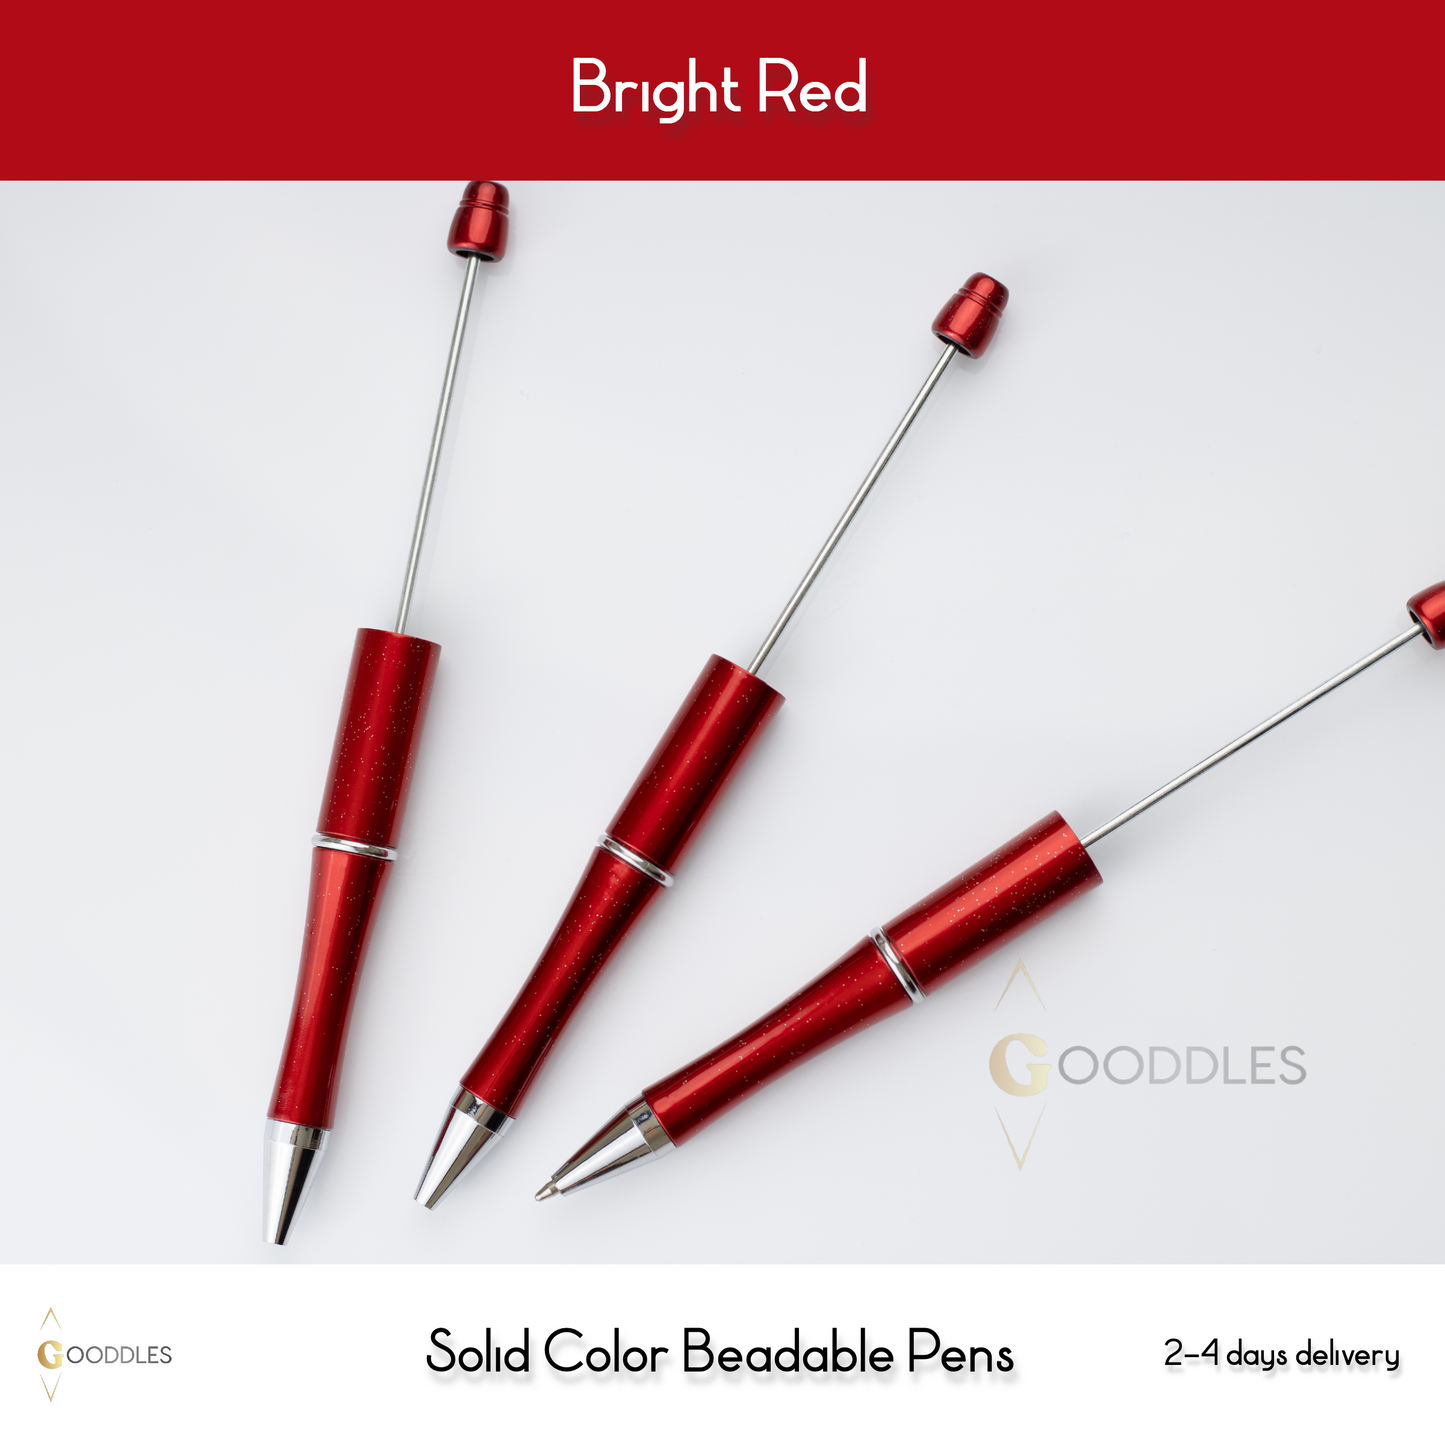 Bright Red Solid Color Pens